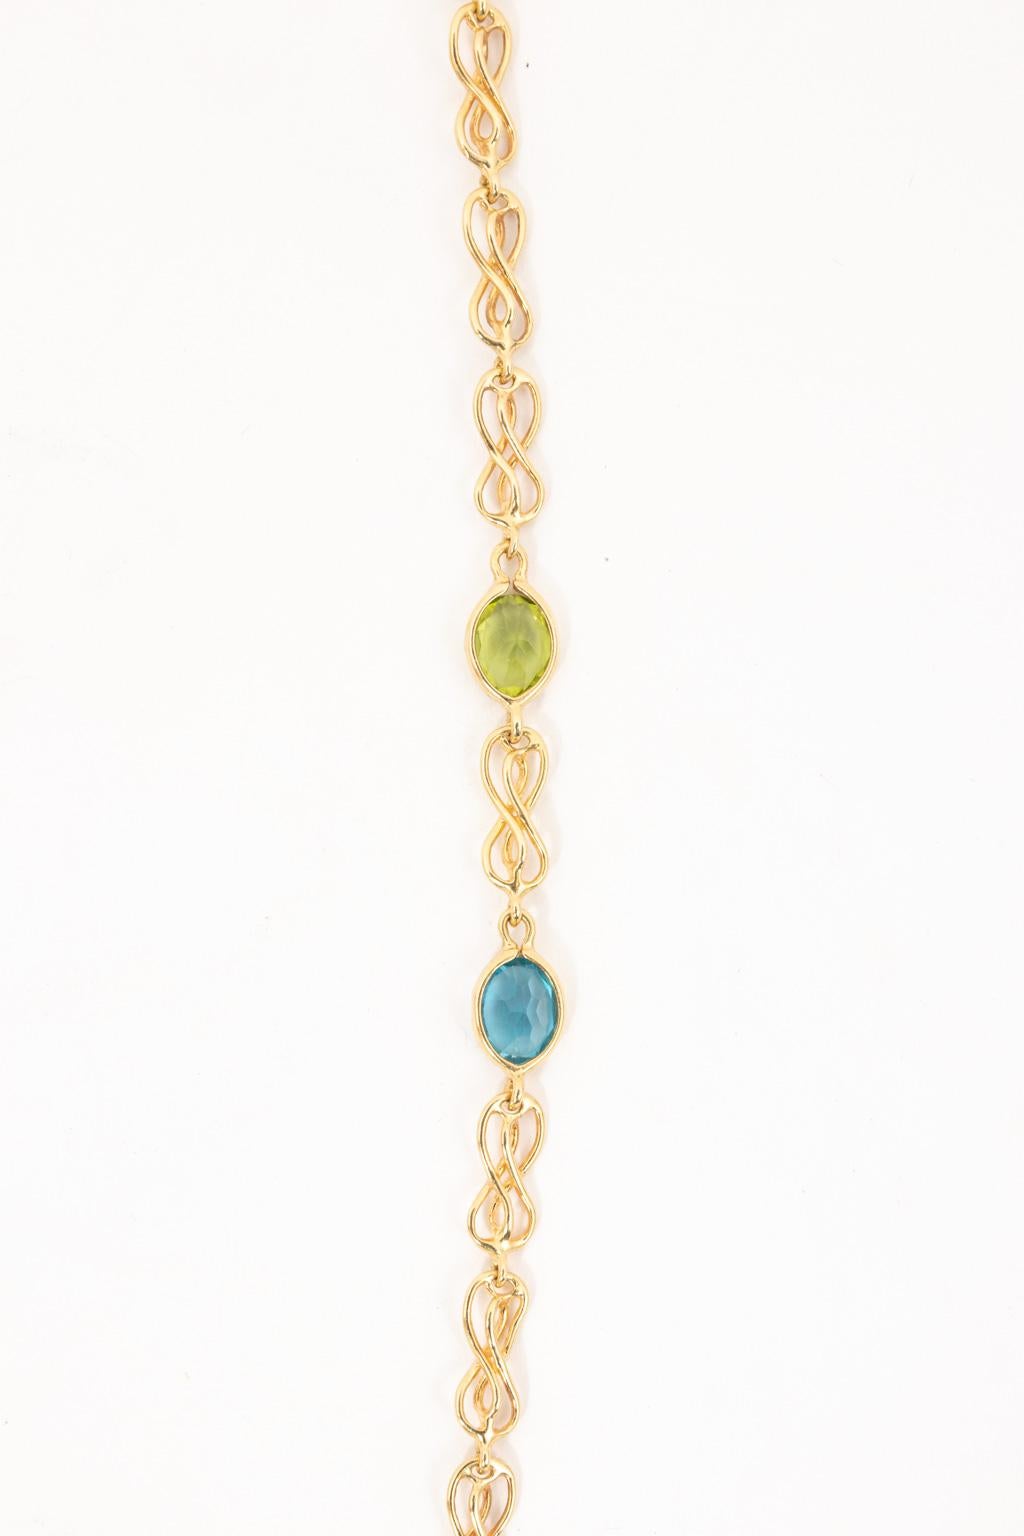 Handcrafted 14K Yellow Gold Multi-Gem Necklace Amethyst Peridot and Blue Topaz 3